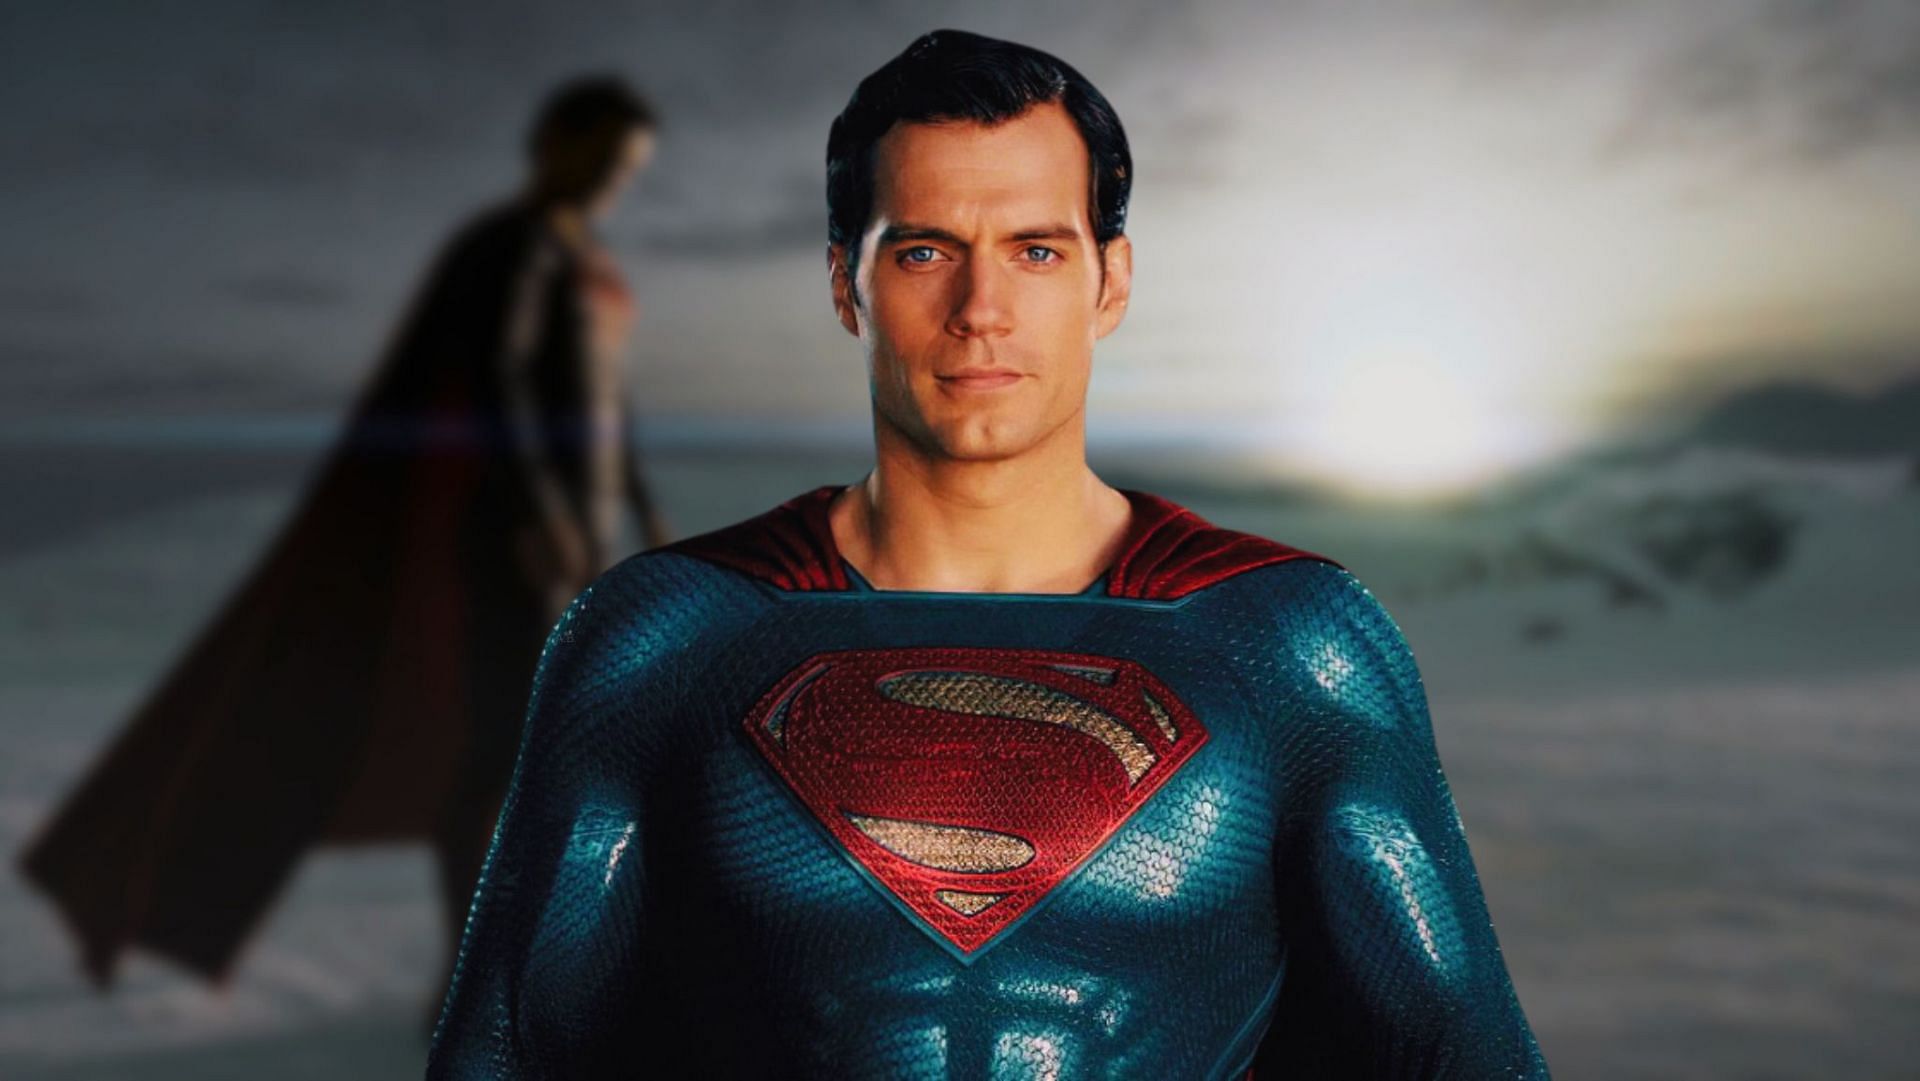 Man of Steel 2 Back On With Henry Cavill's Superman After Years of